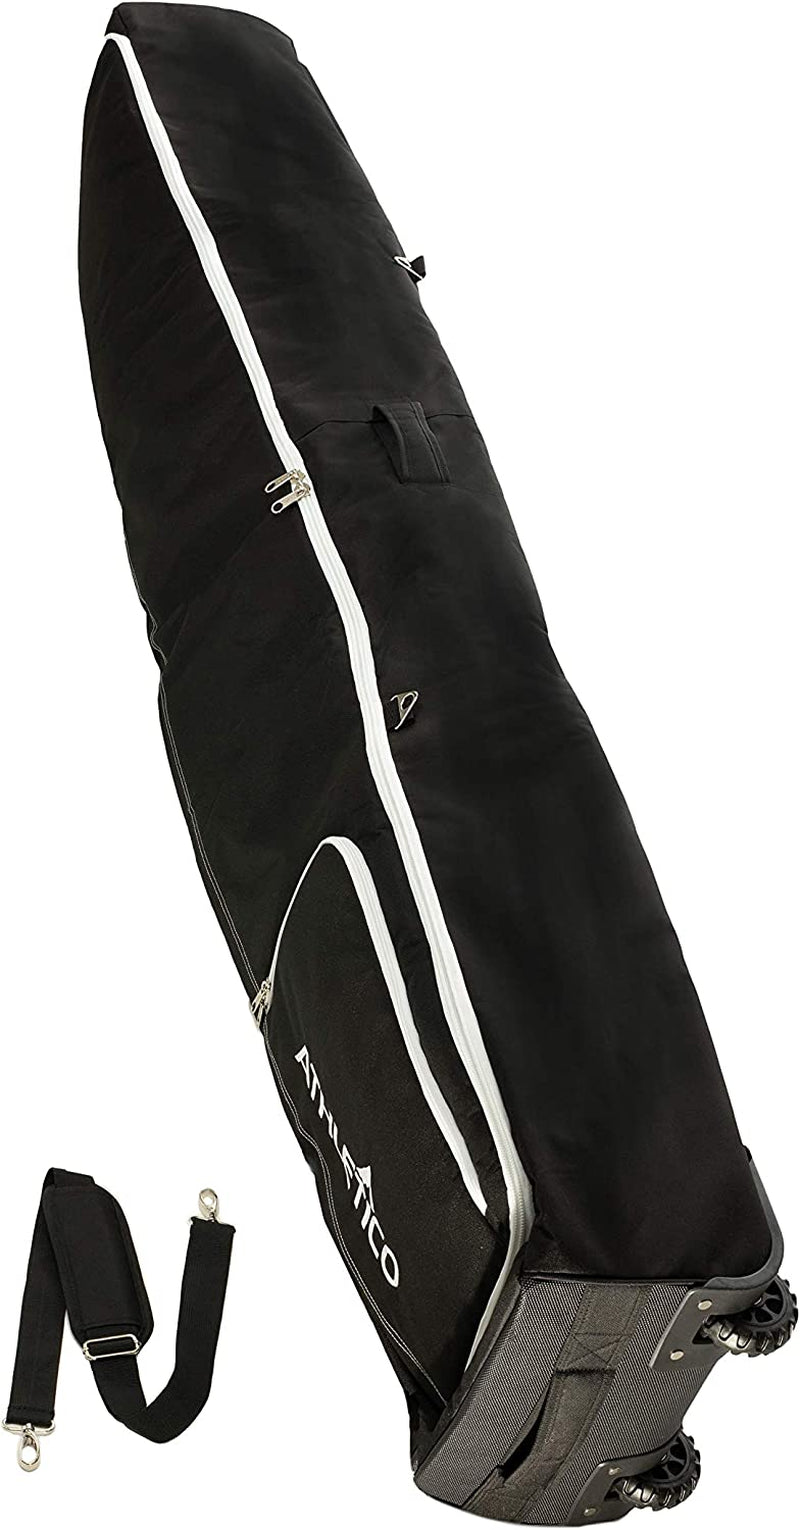 Athletico Rolling Double Ski Bag - Padded Ski Bag with Wheels for Air Travel